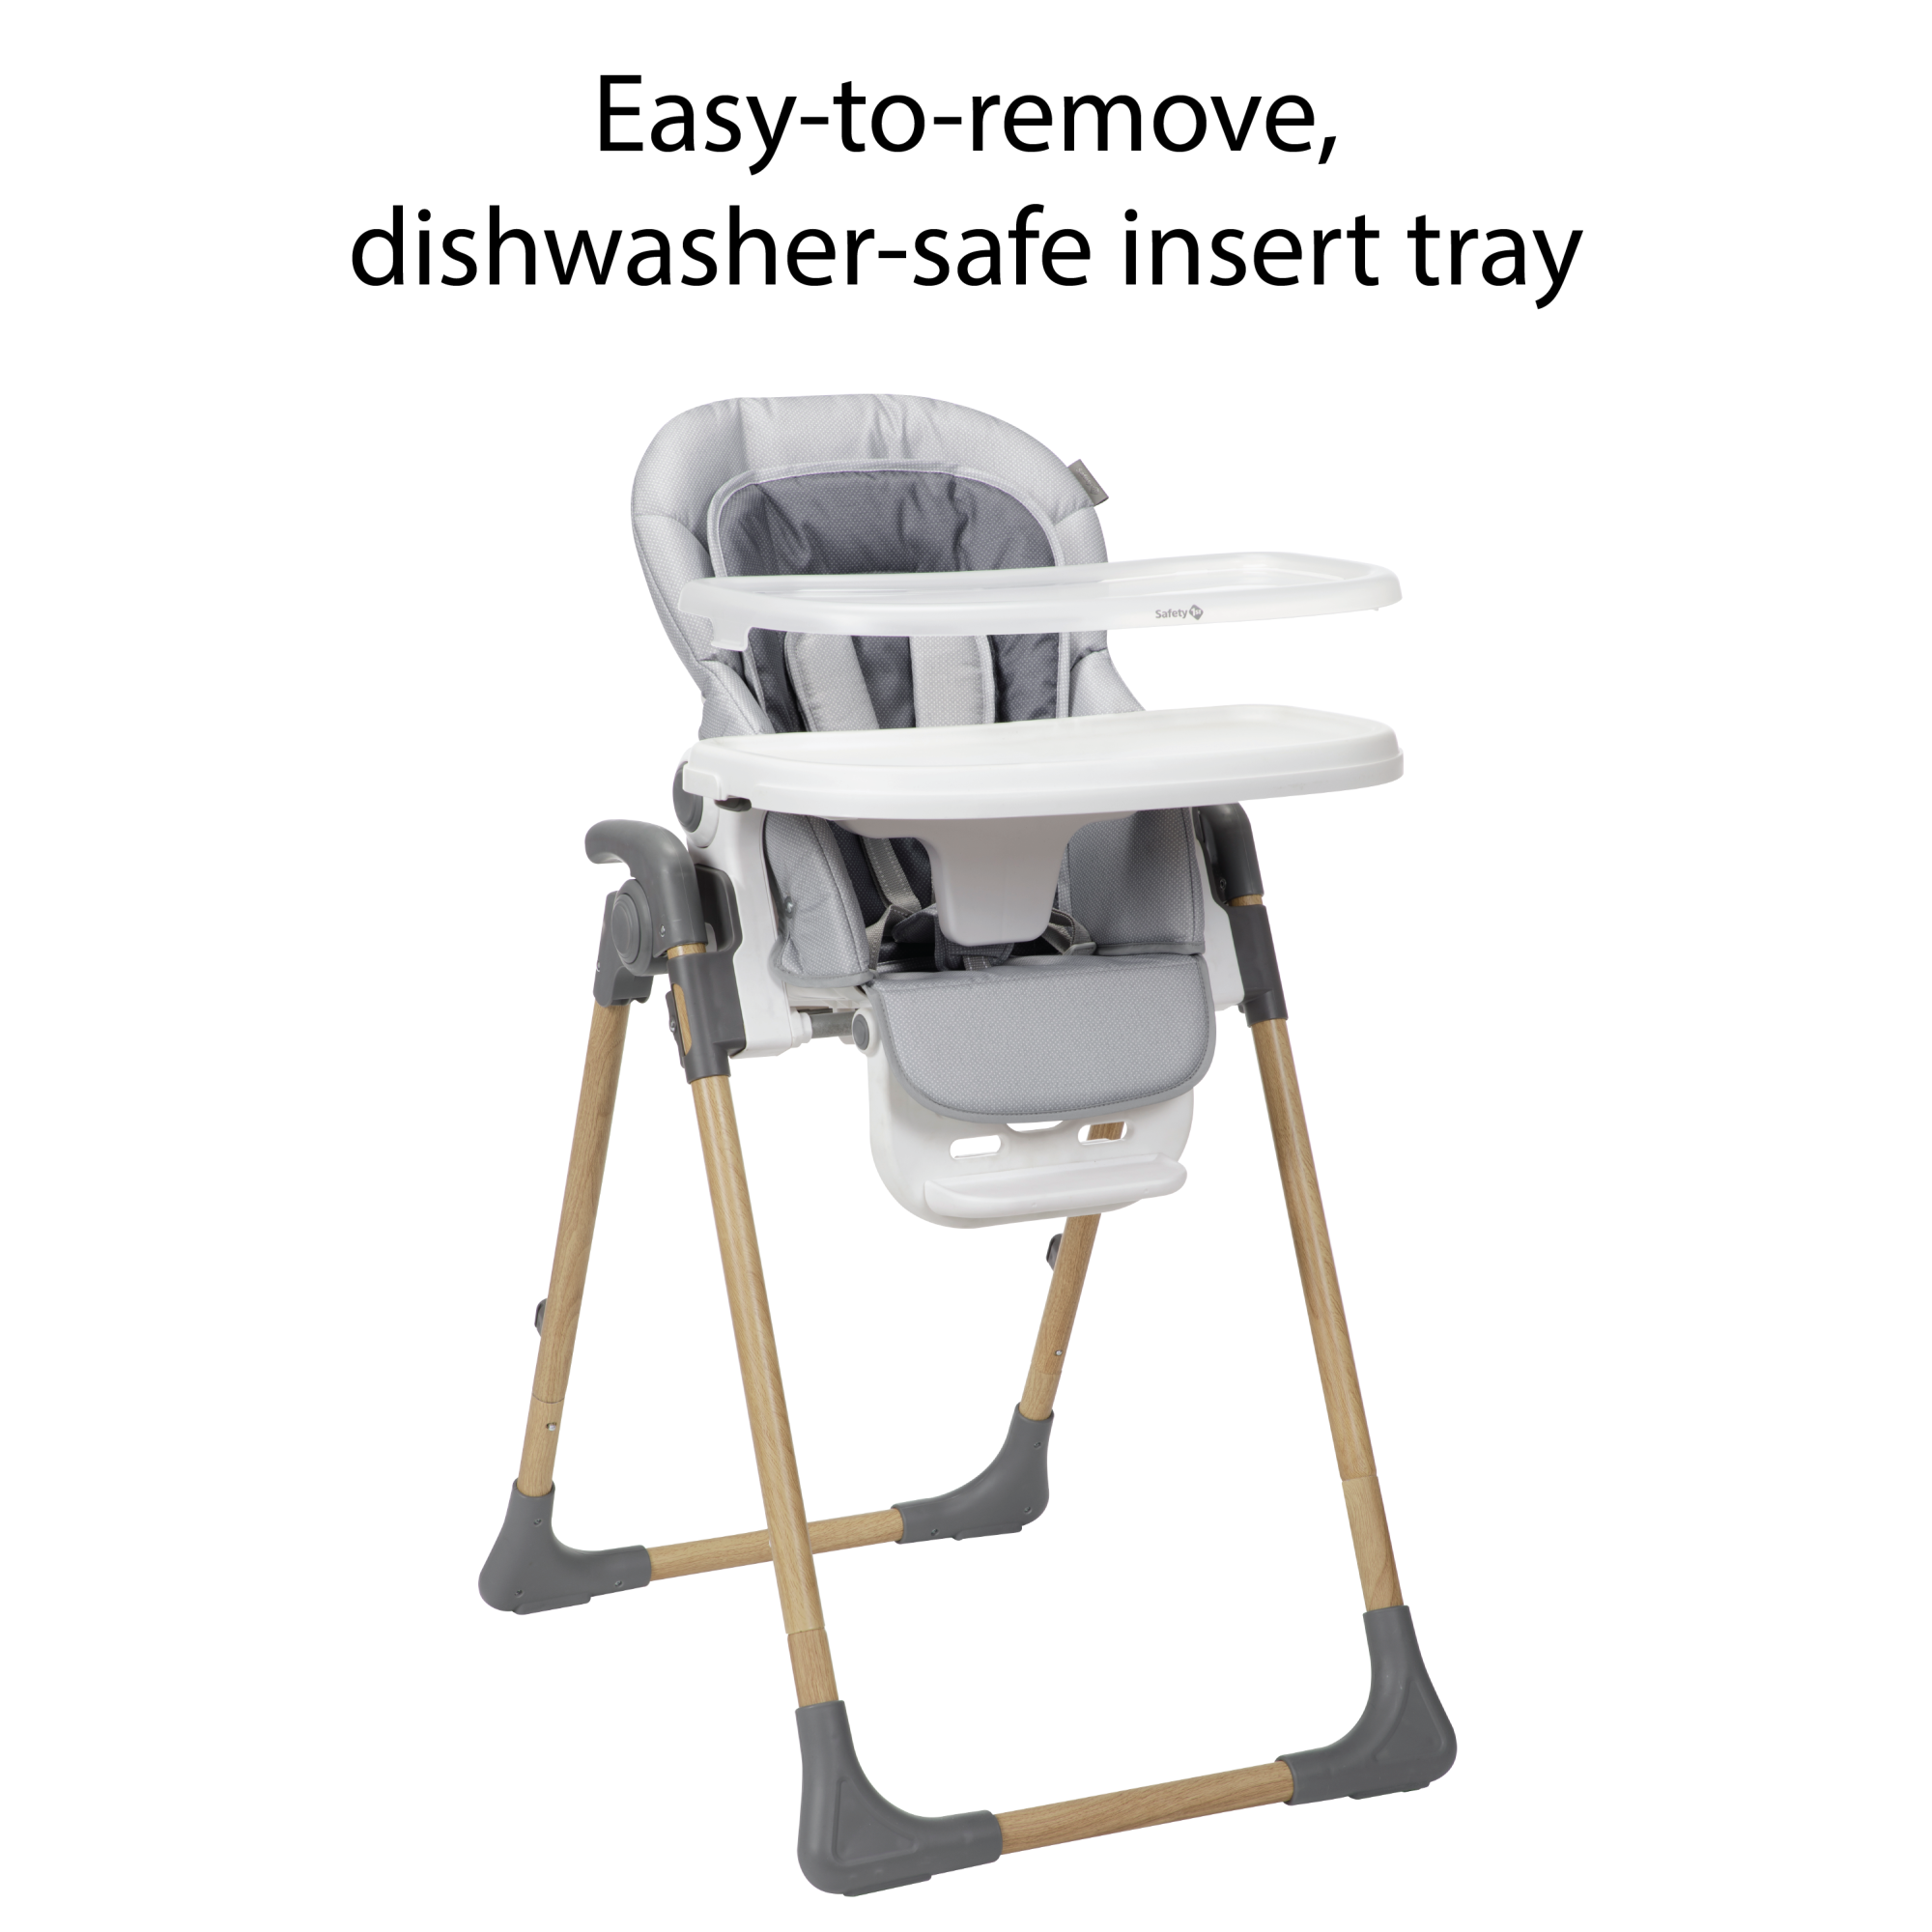 3-in-1 Grow and Go Plus High Chair - easy-to-remove, dishwasher-safe insert tray